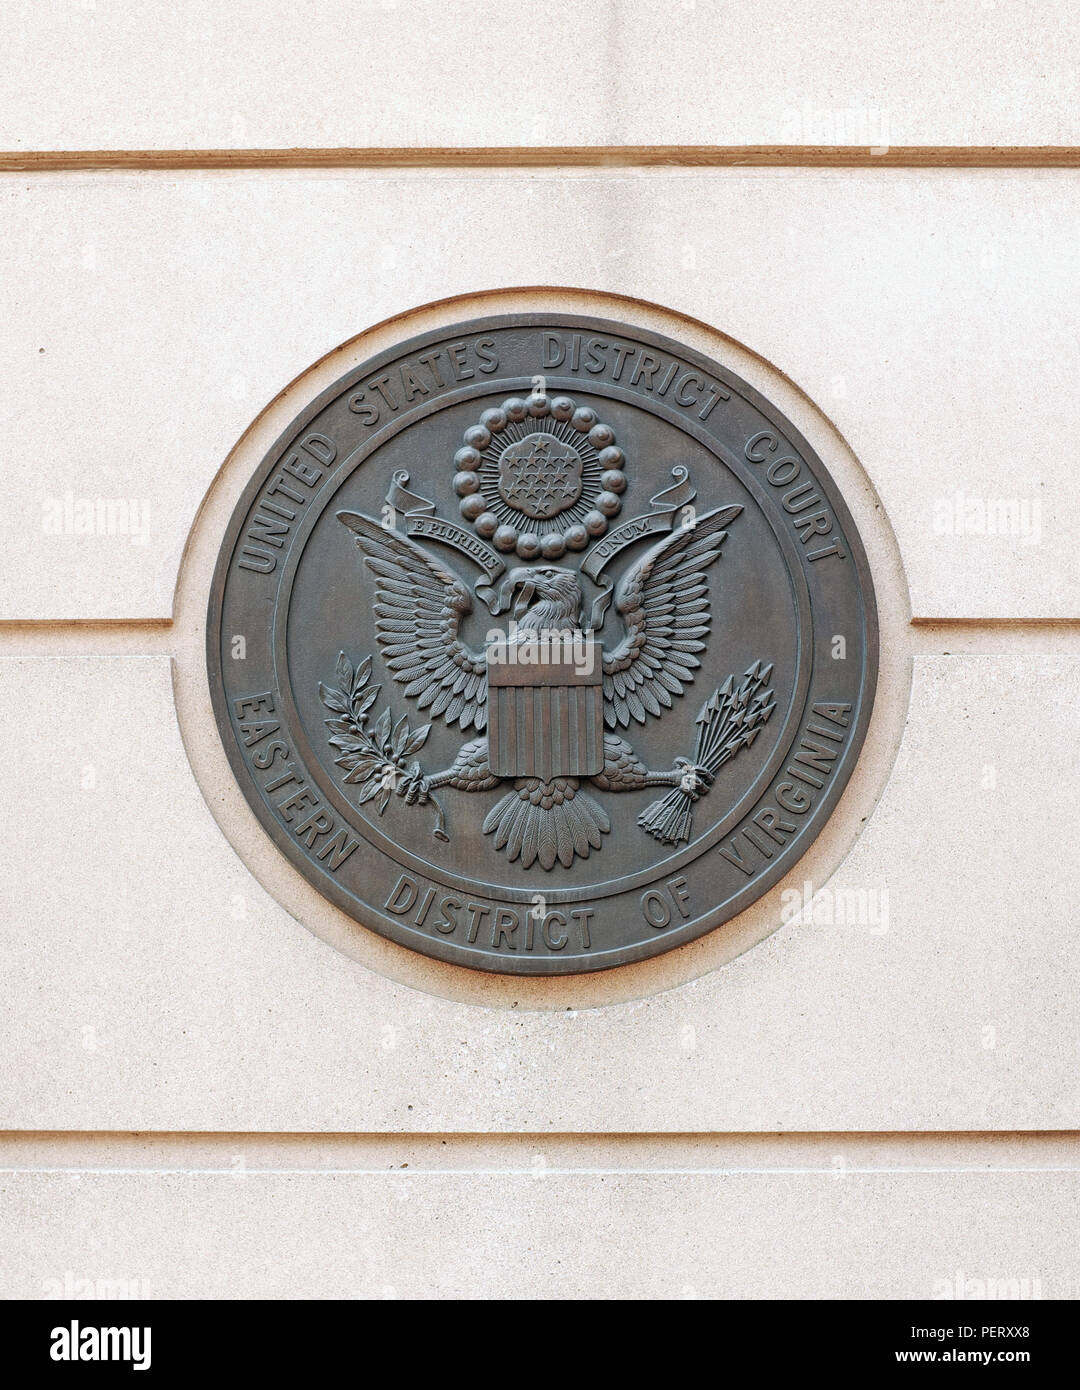 The United States District Court Eastern District of Virginia seal on the outside of the Alexandria, Virginia US Courthouse. Stock Photo